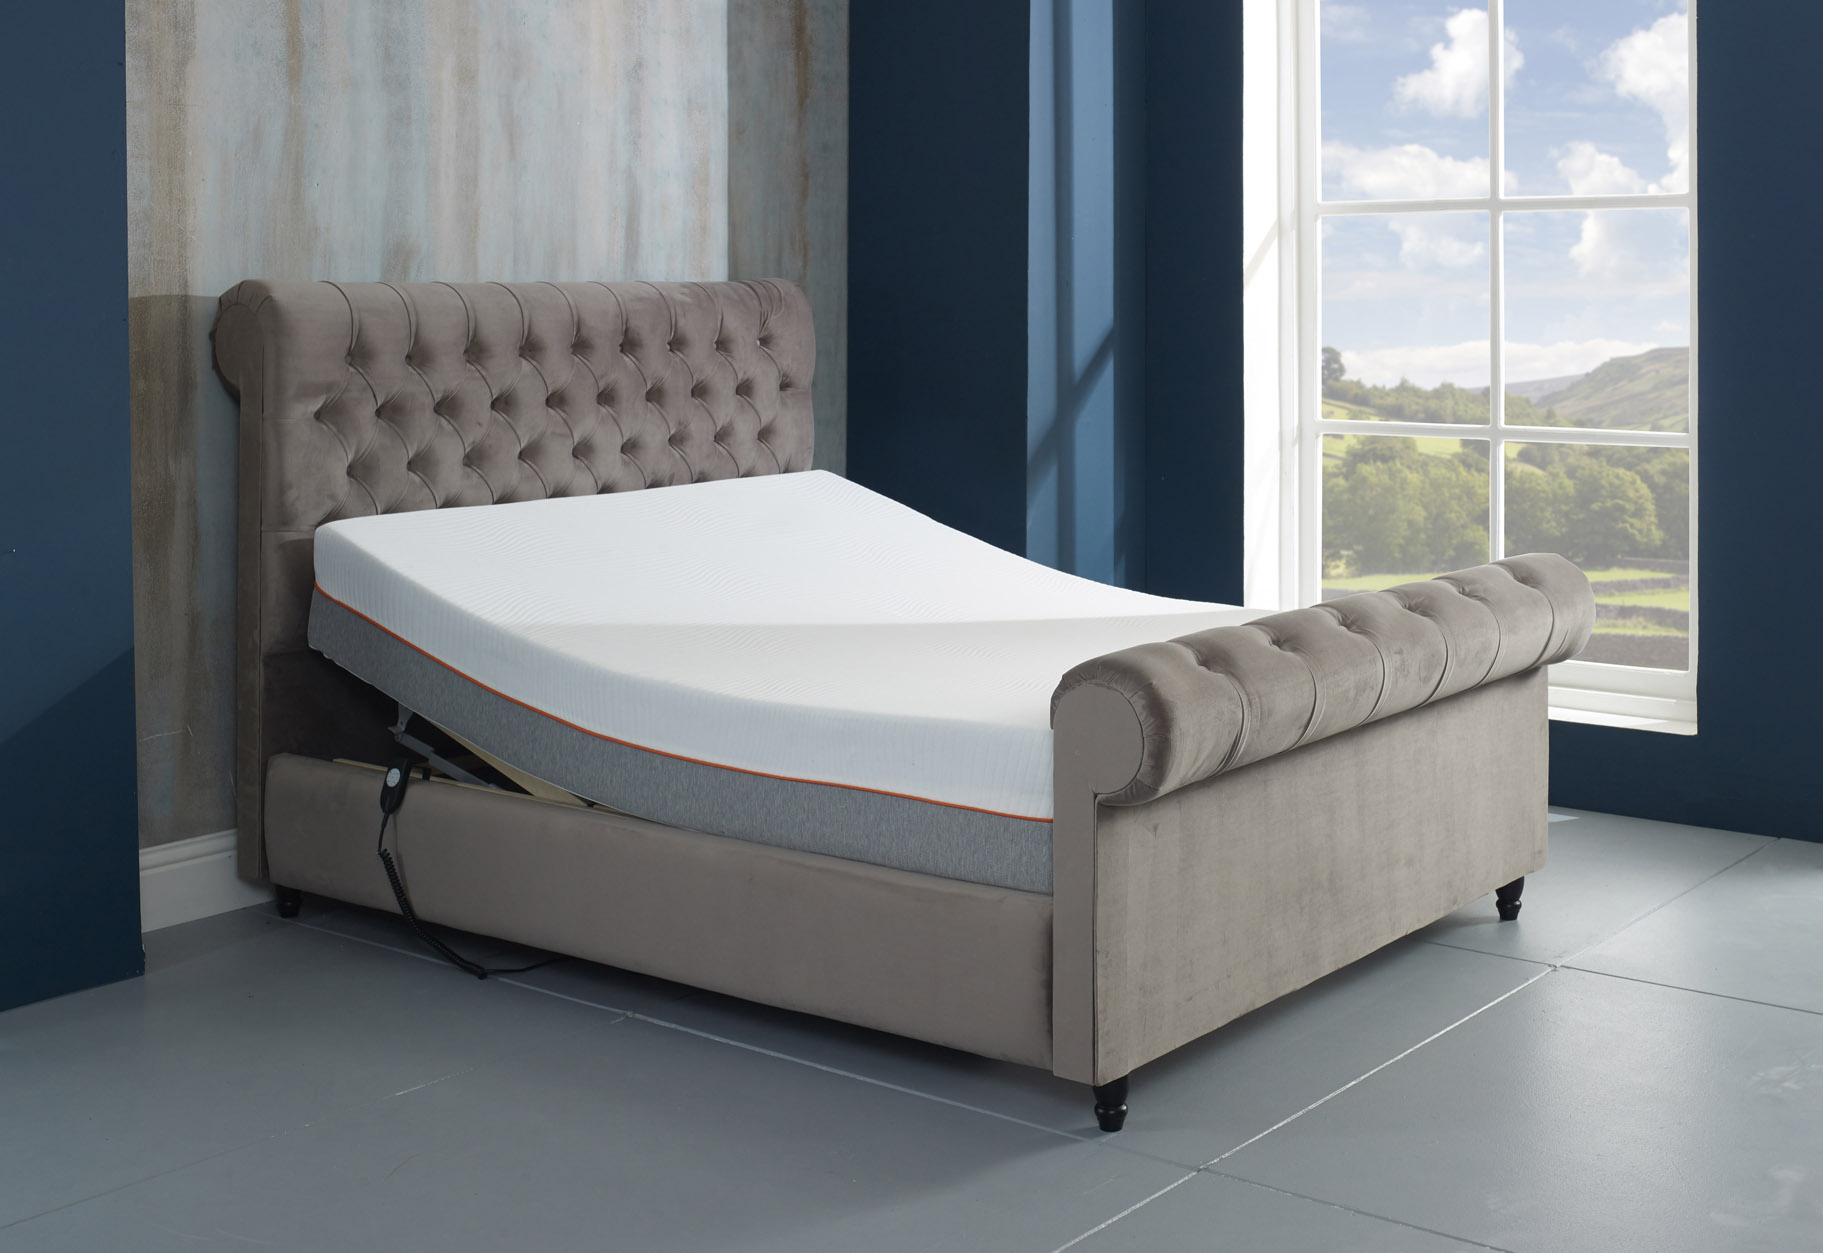 Belford Adjustable Upholstered Bed, How To Put An Adjustable Bed In A Frame